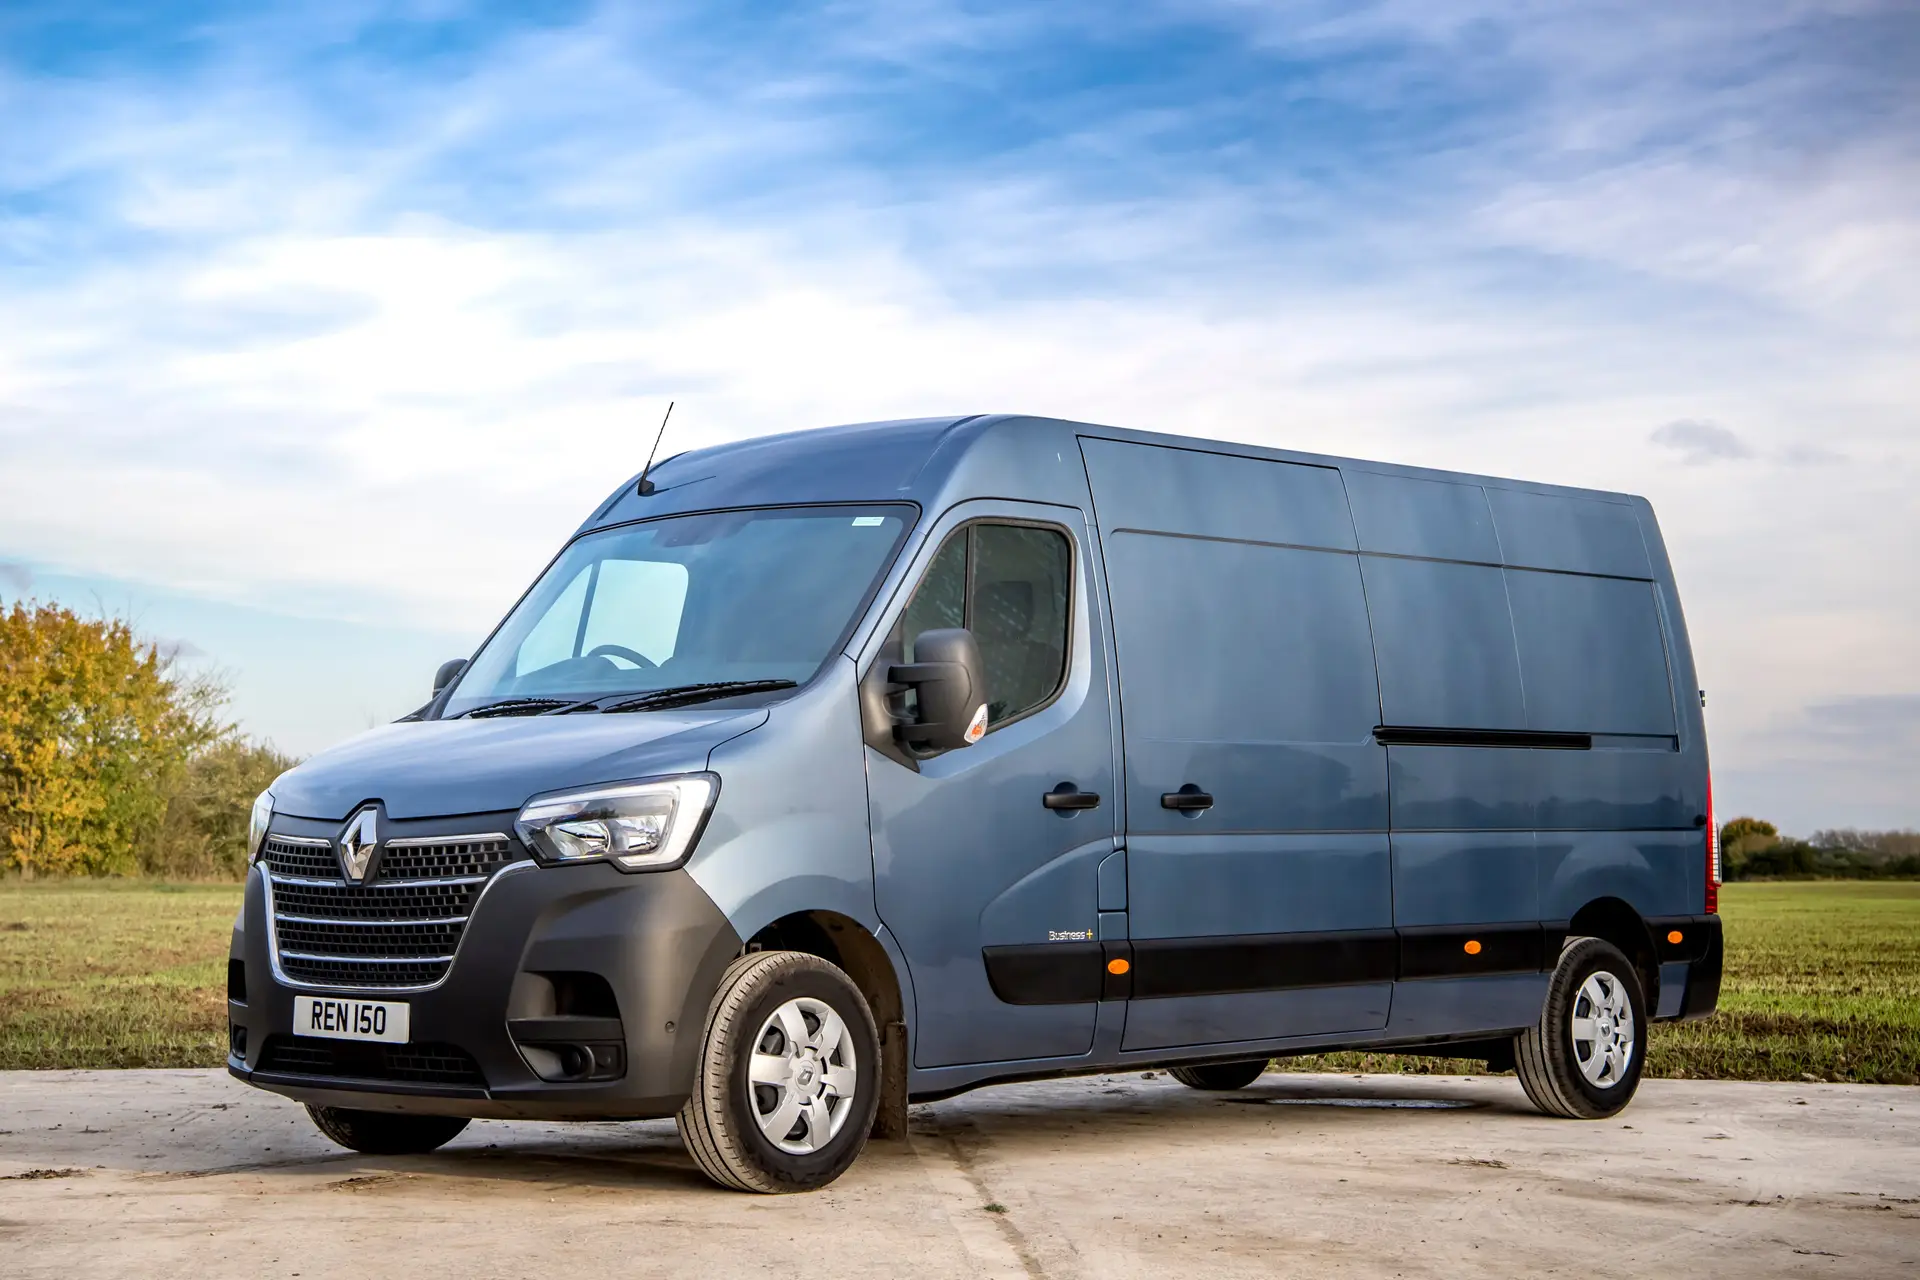 Renault Master front side view